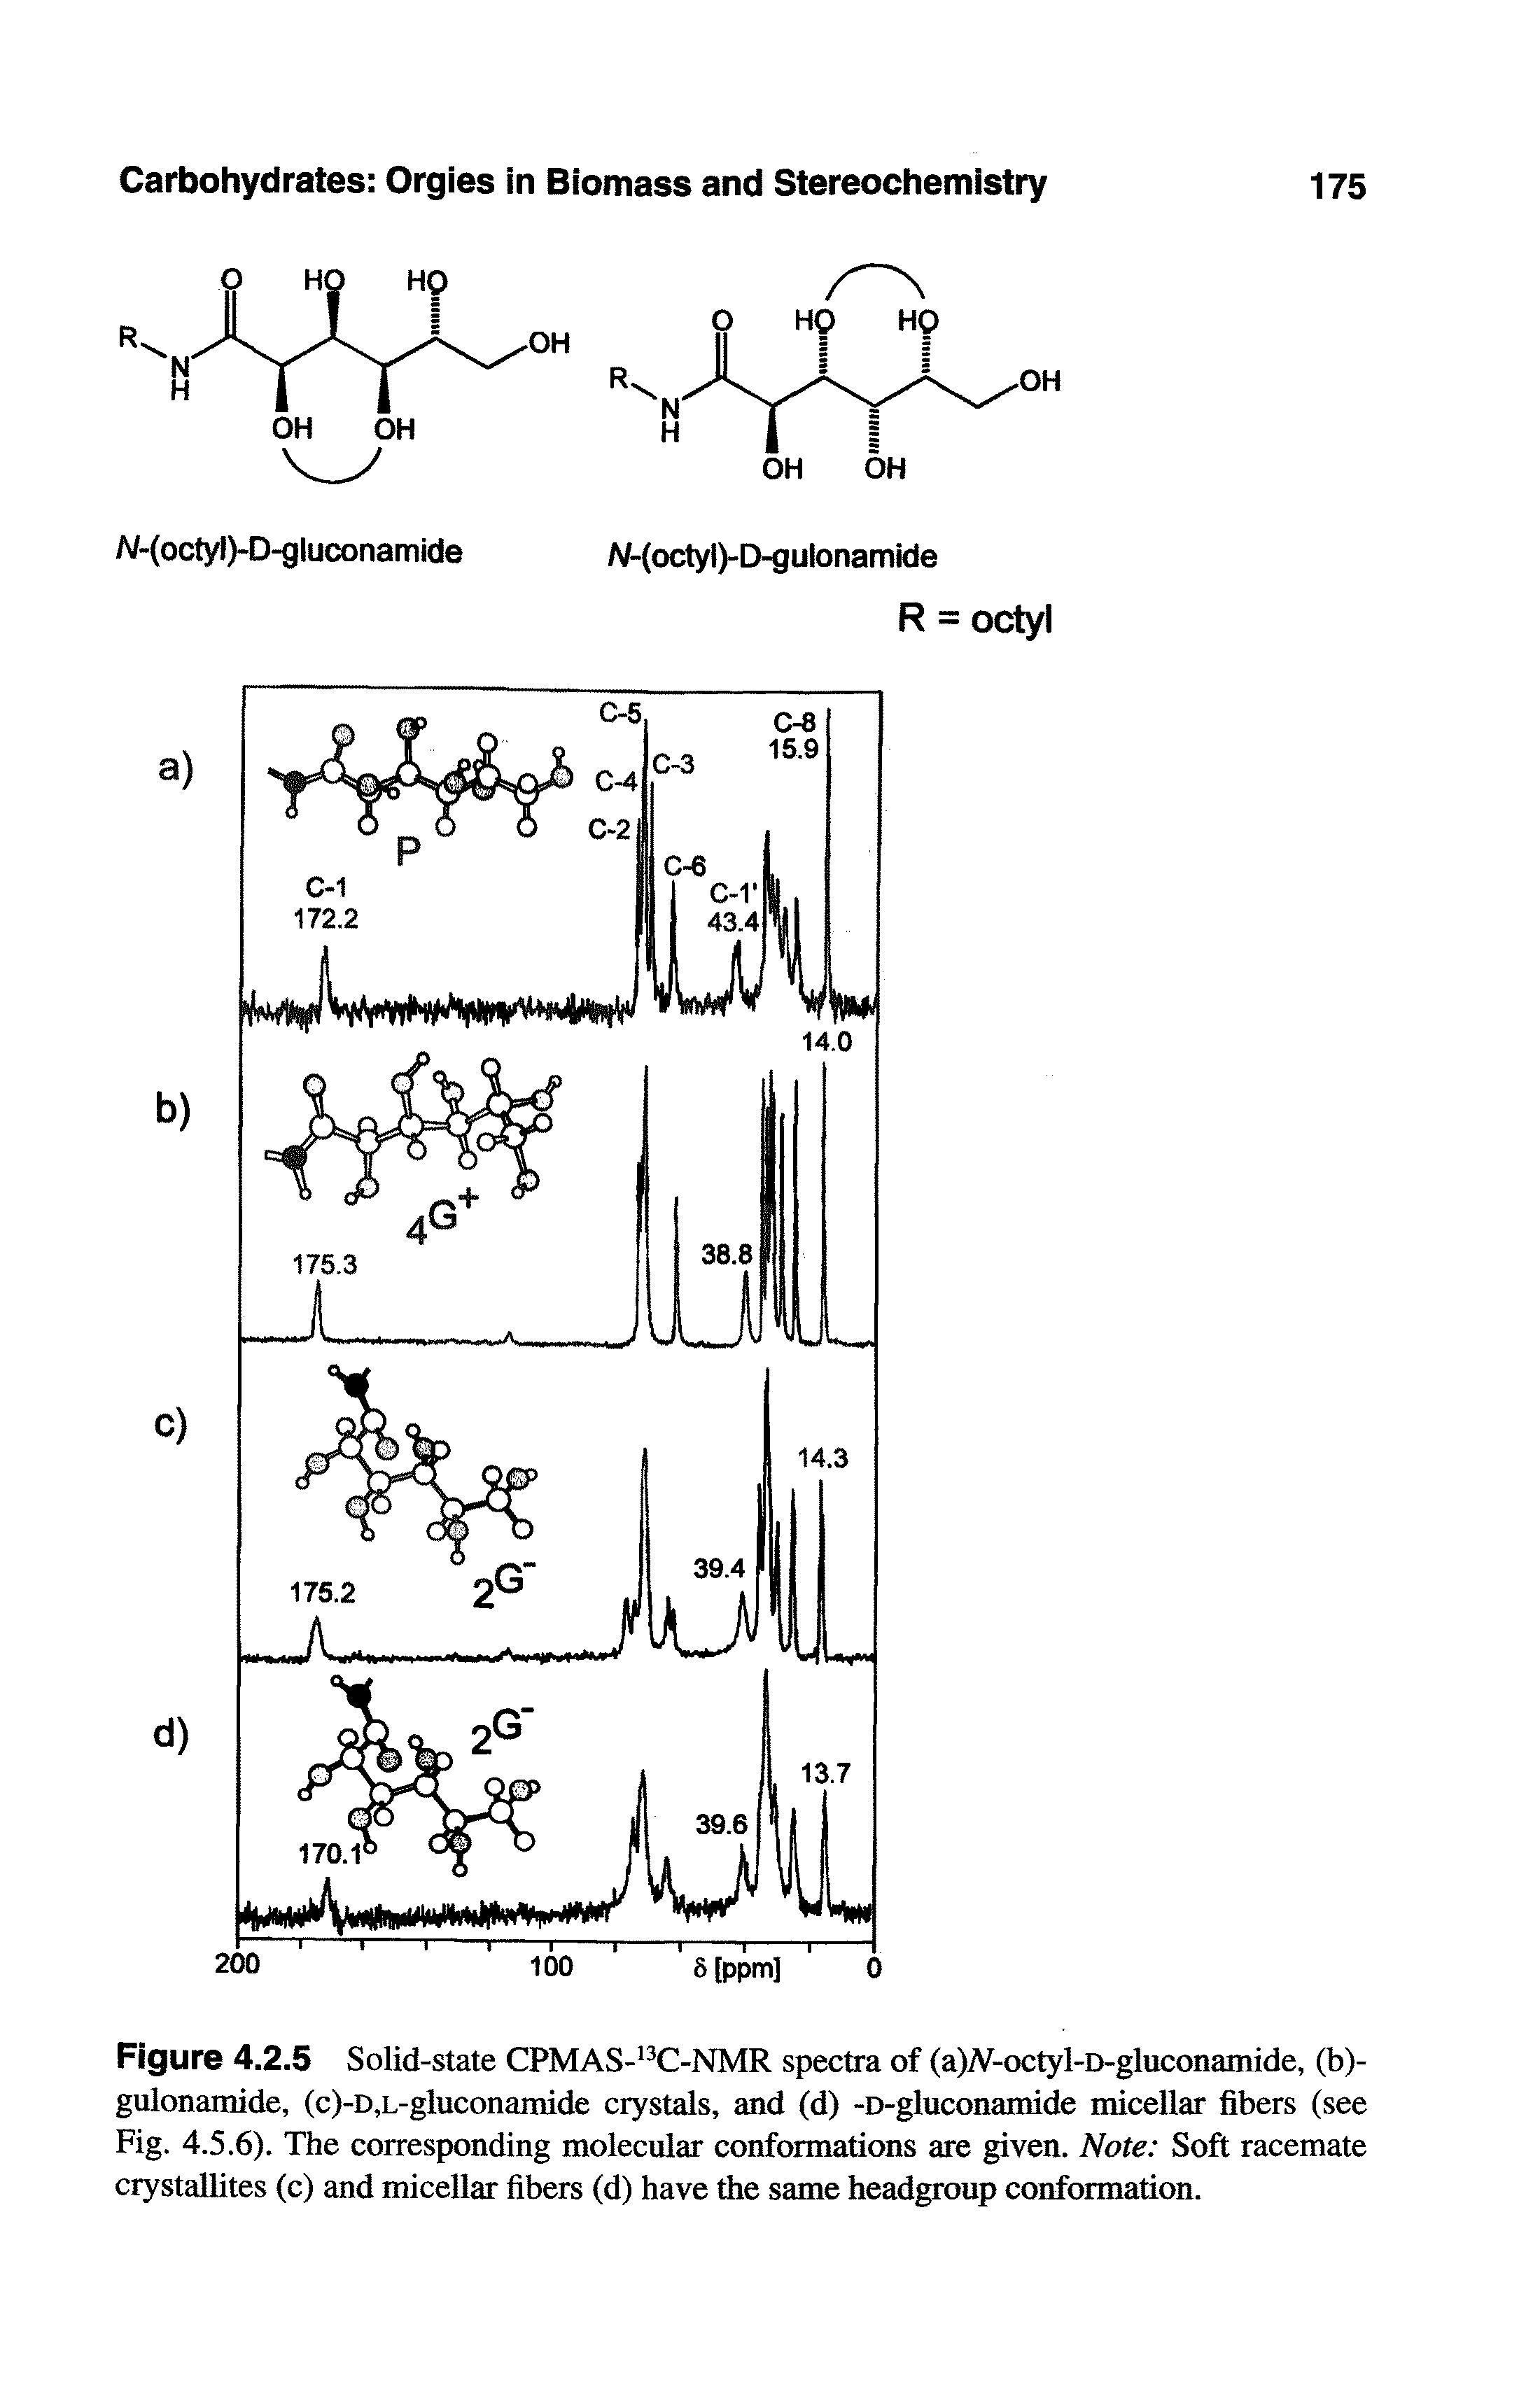 Figure 4.2.5 Solid-state CPMAS- C-NMR spectra of (a)iV-octyl-D-gluconainide, (b)-gulonamide, (c)-D,L-gluconamide crystals, and (d) -D-gluconamide micellar fibers (see Fig. 4.5.6). The corresponding molecular conformations are given. Note Soft racemate crystallites (c) and micellar fibers (d) have the same headgroup conformation.